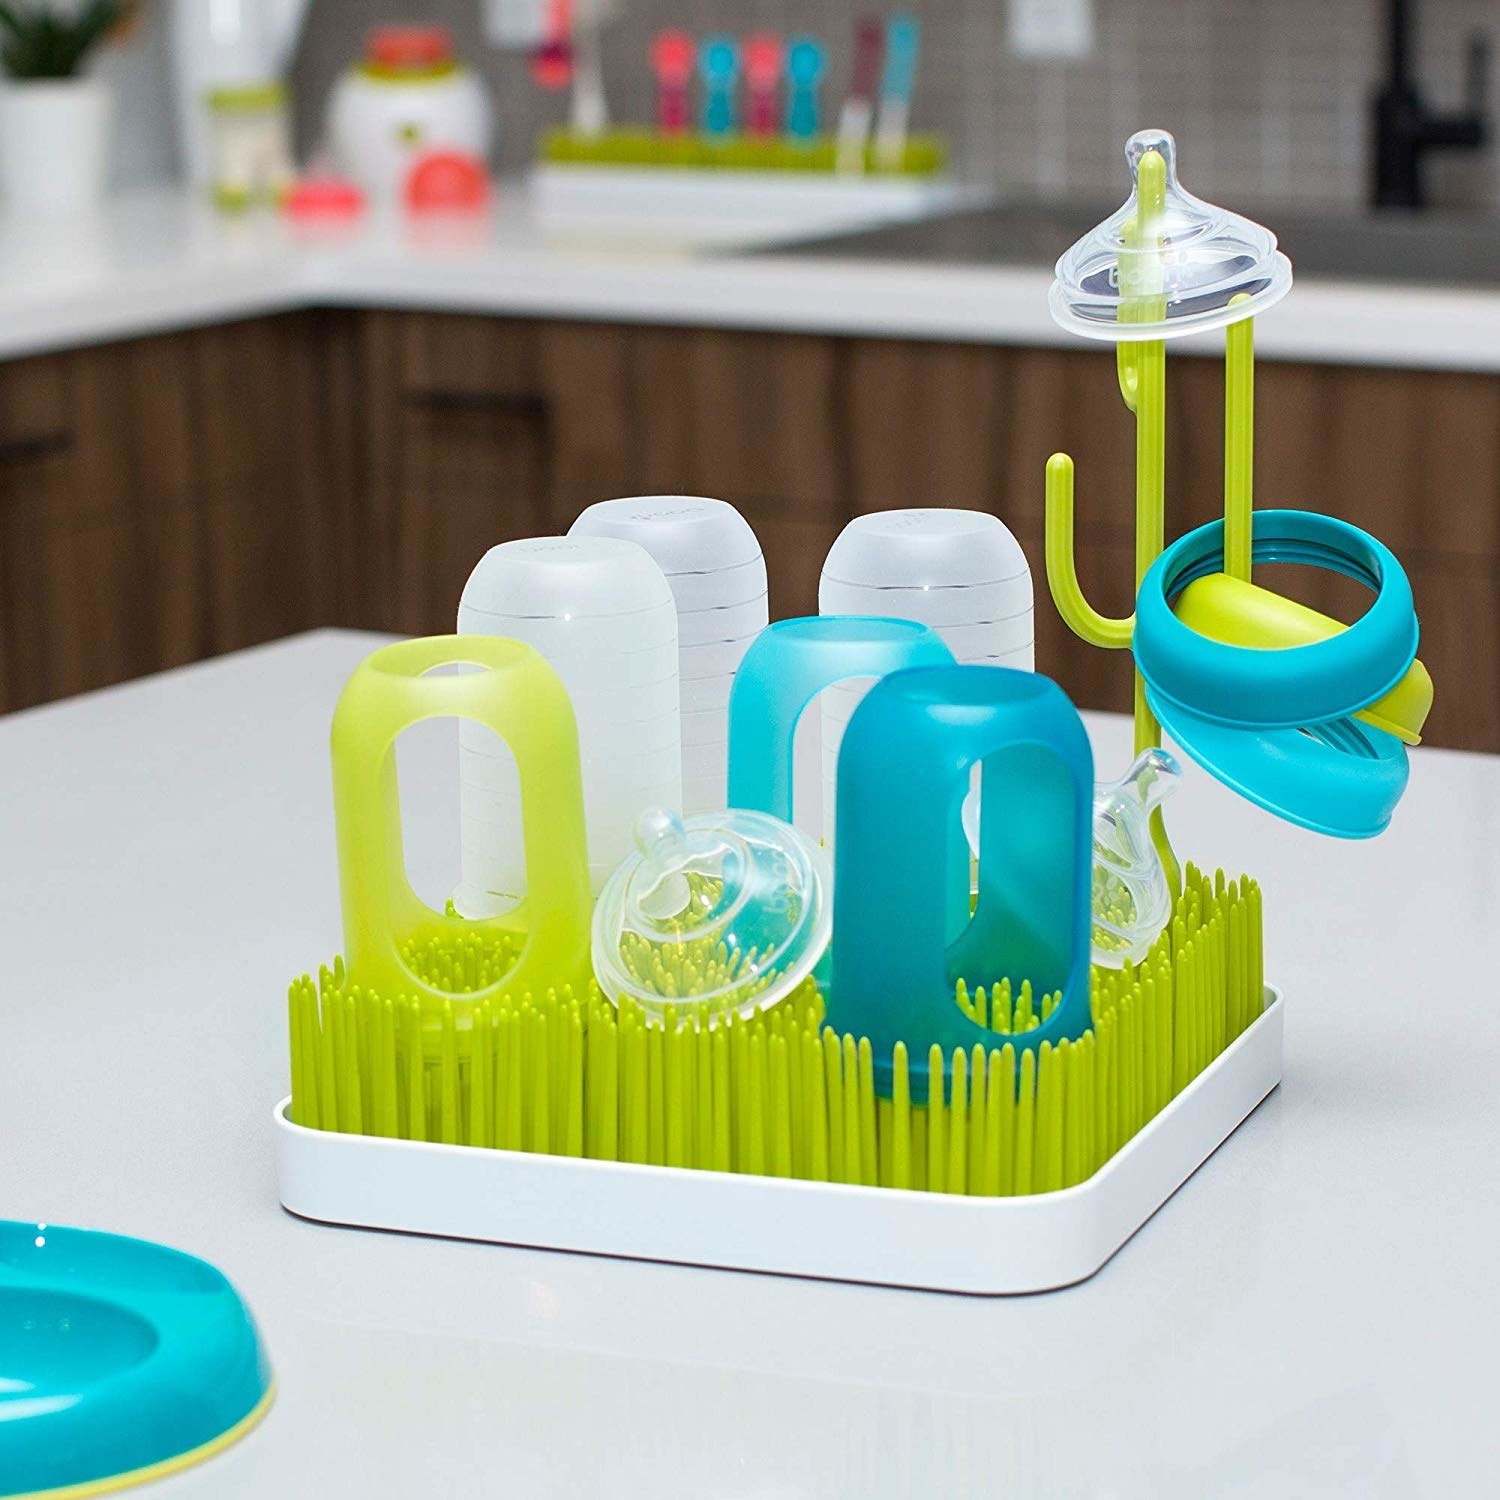 A dish mat with tall thin silicone sticks on it A cactus-shaped silicone hook sticks up in the middle